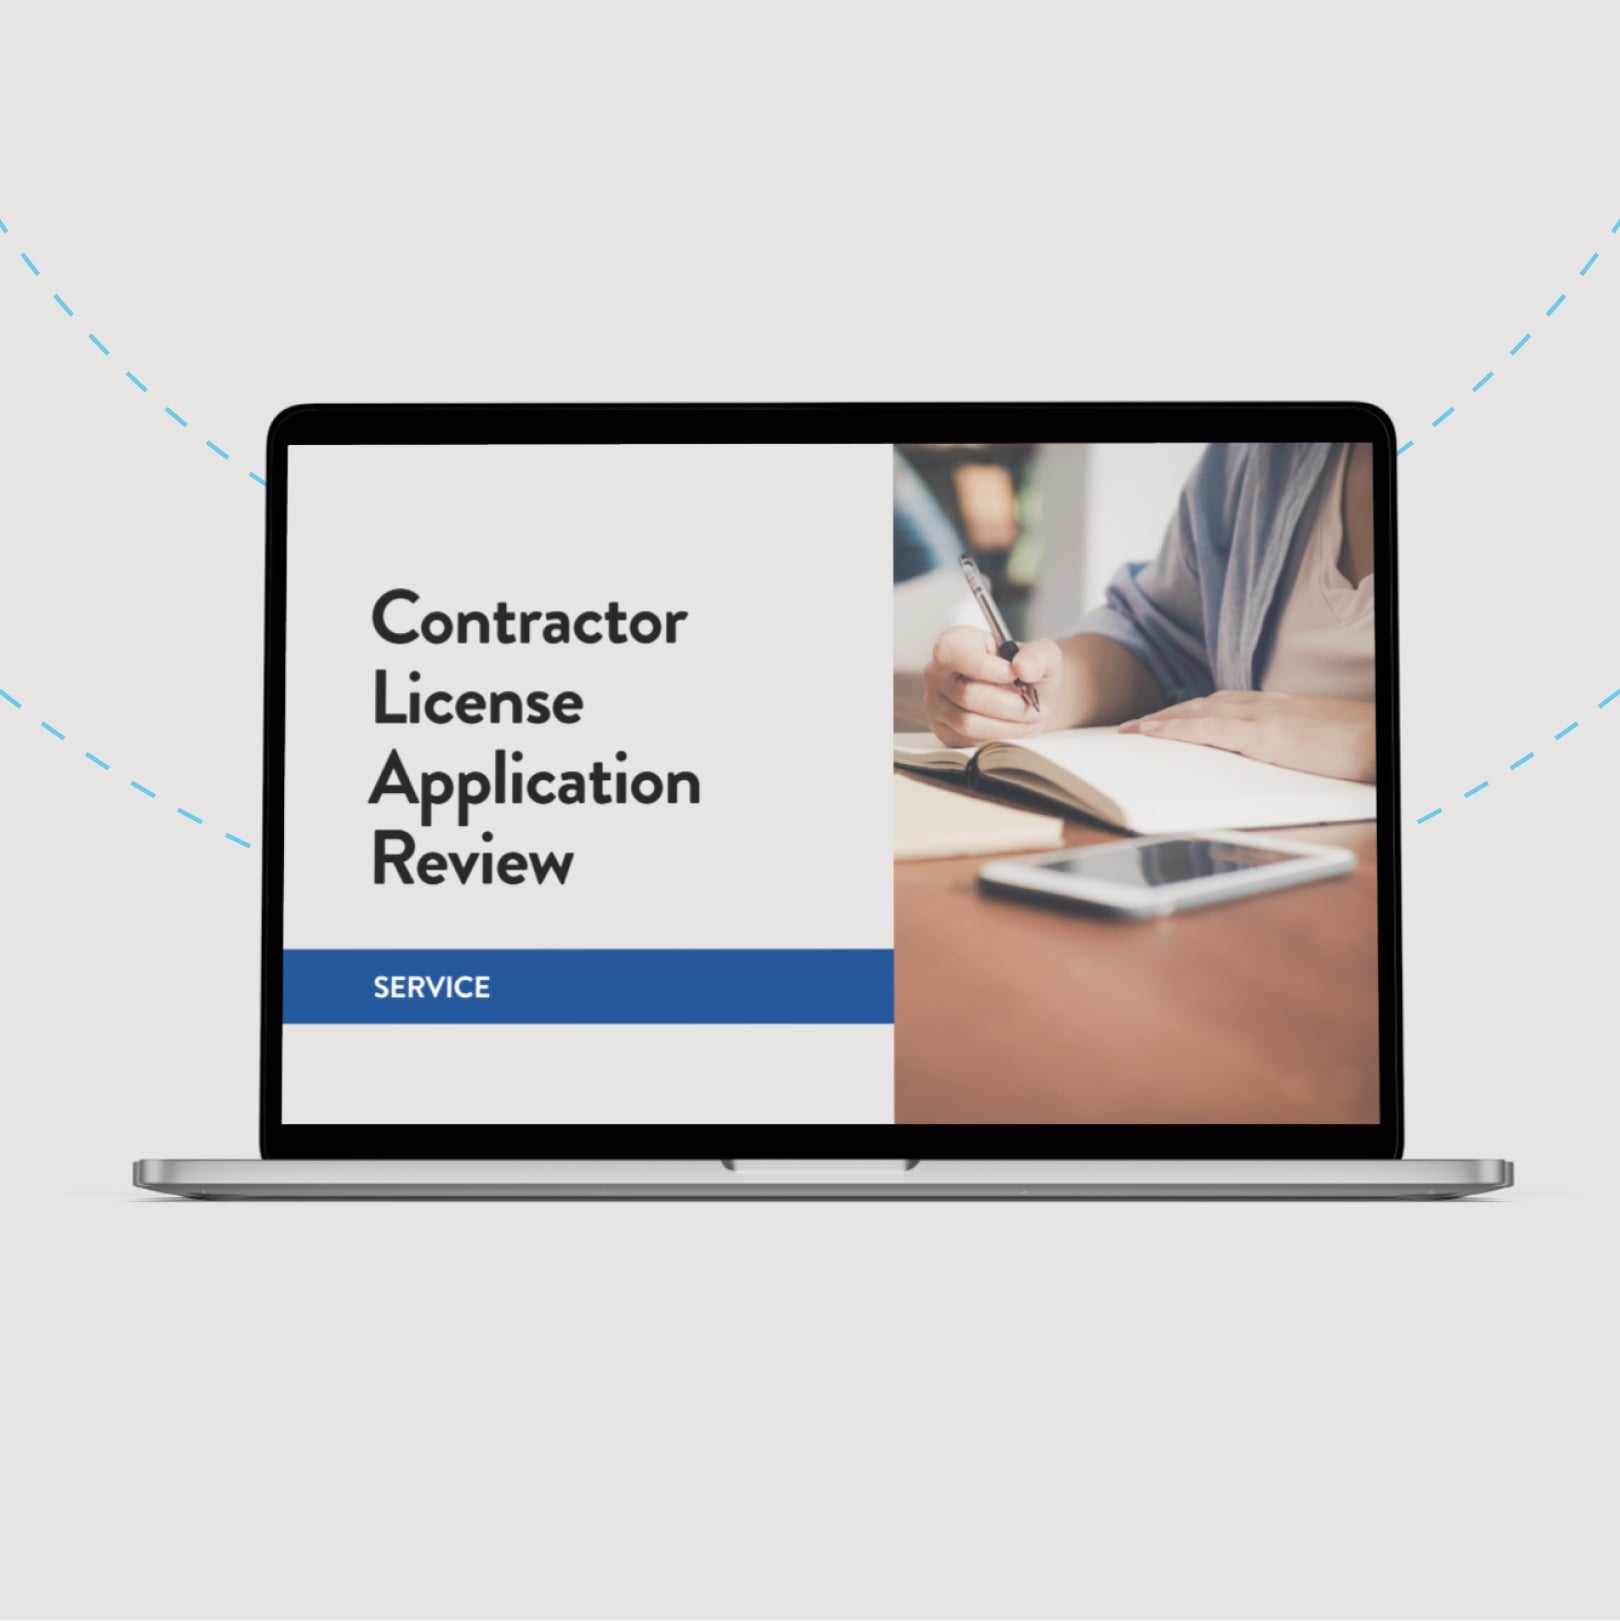 Contractor License Application Review Service